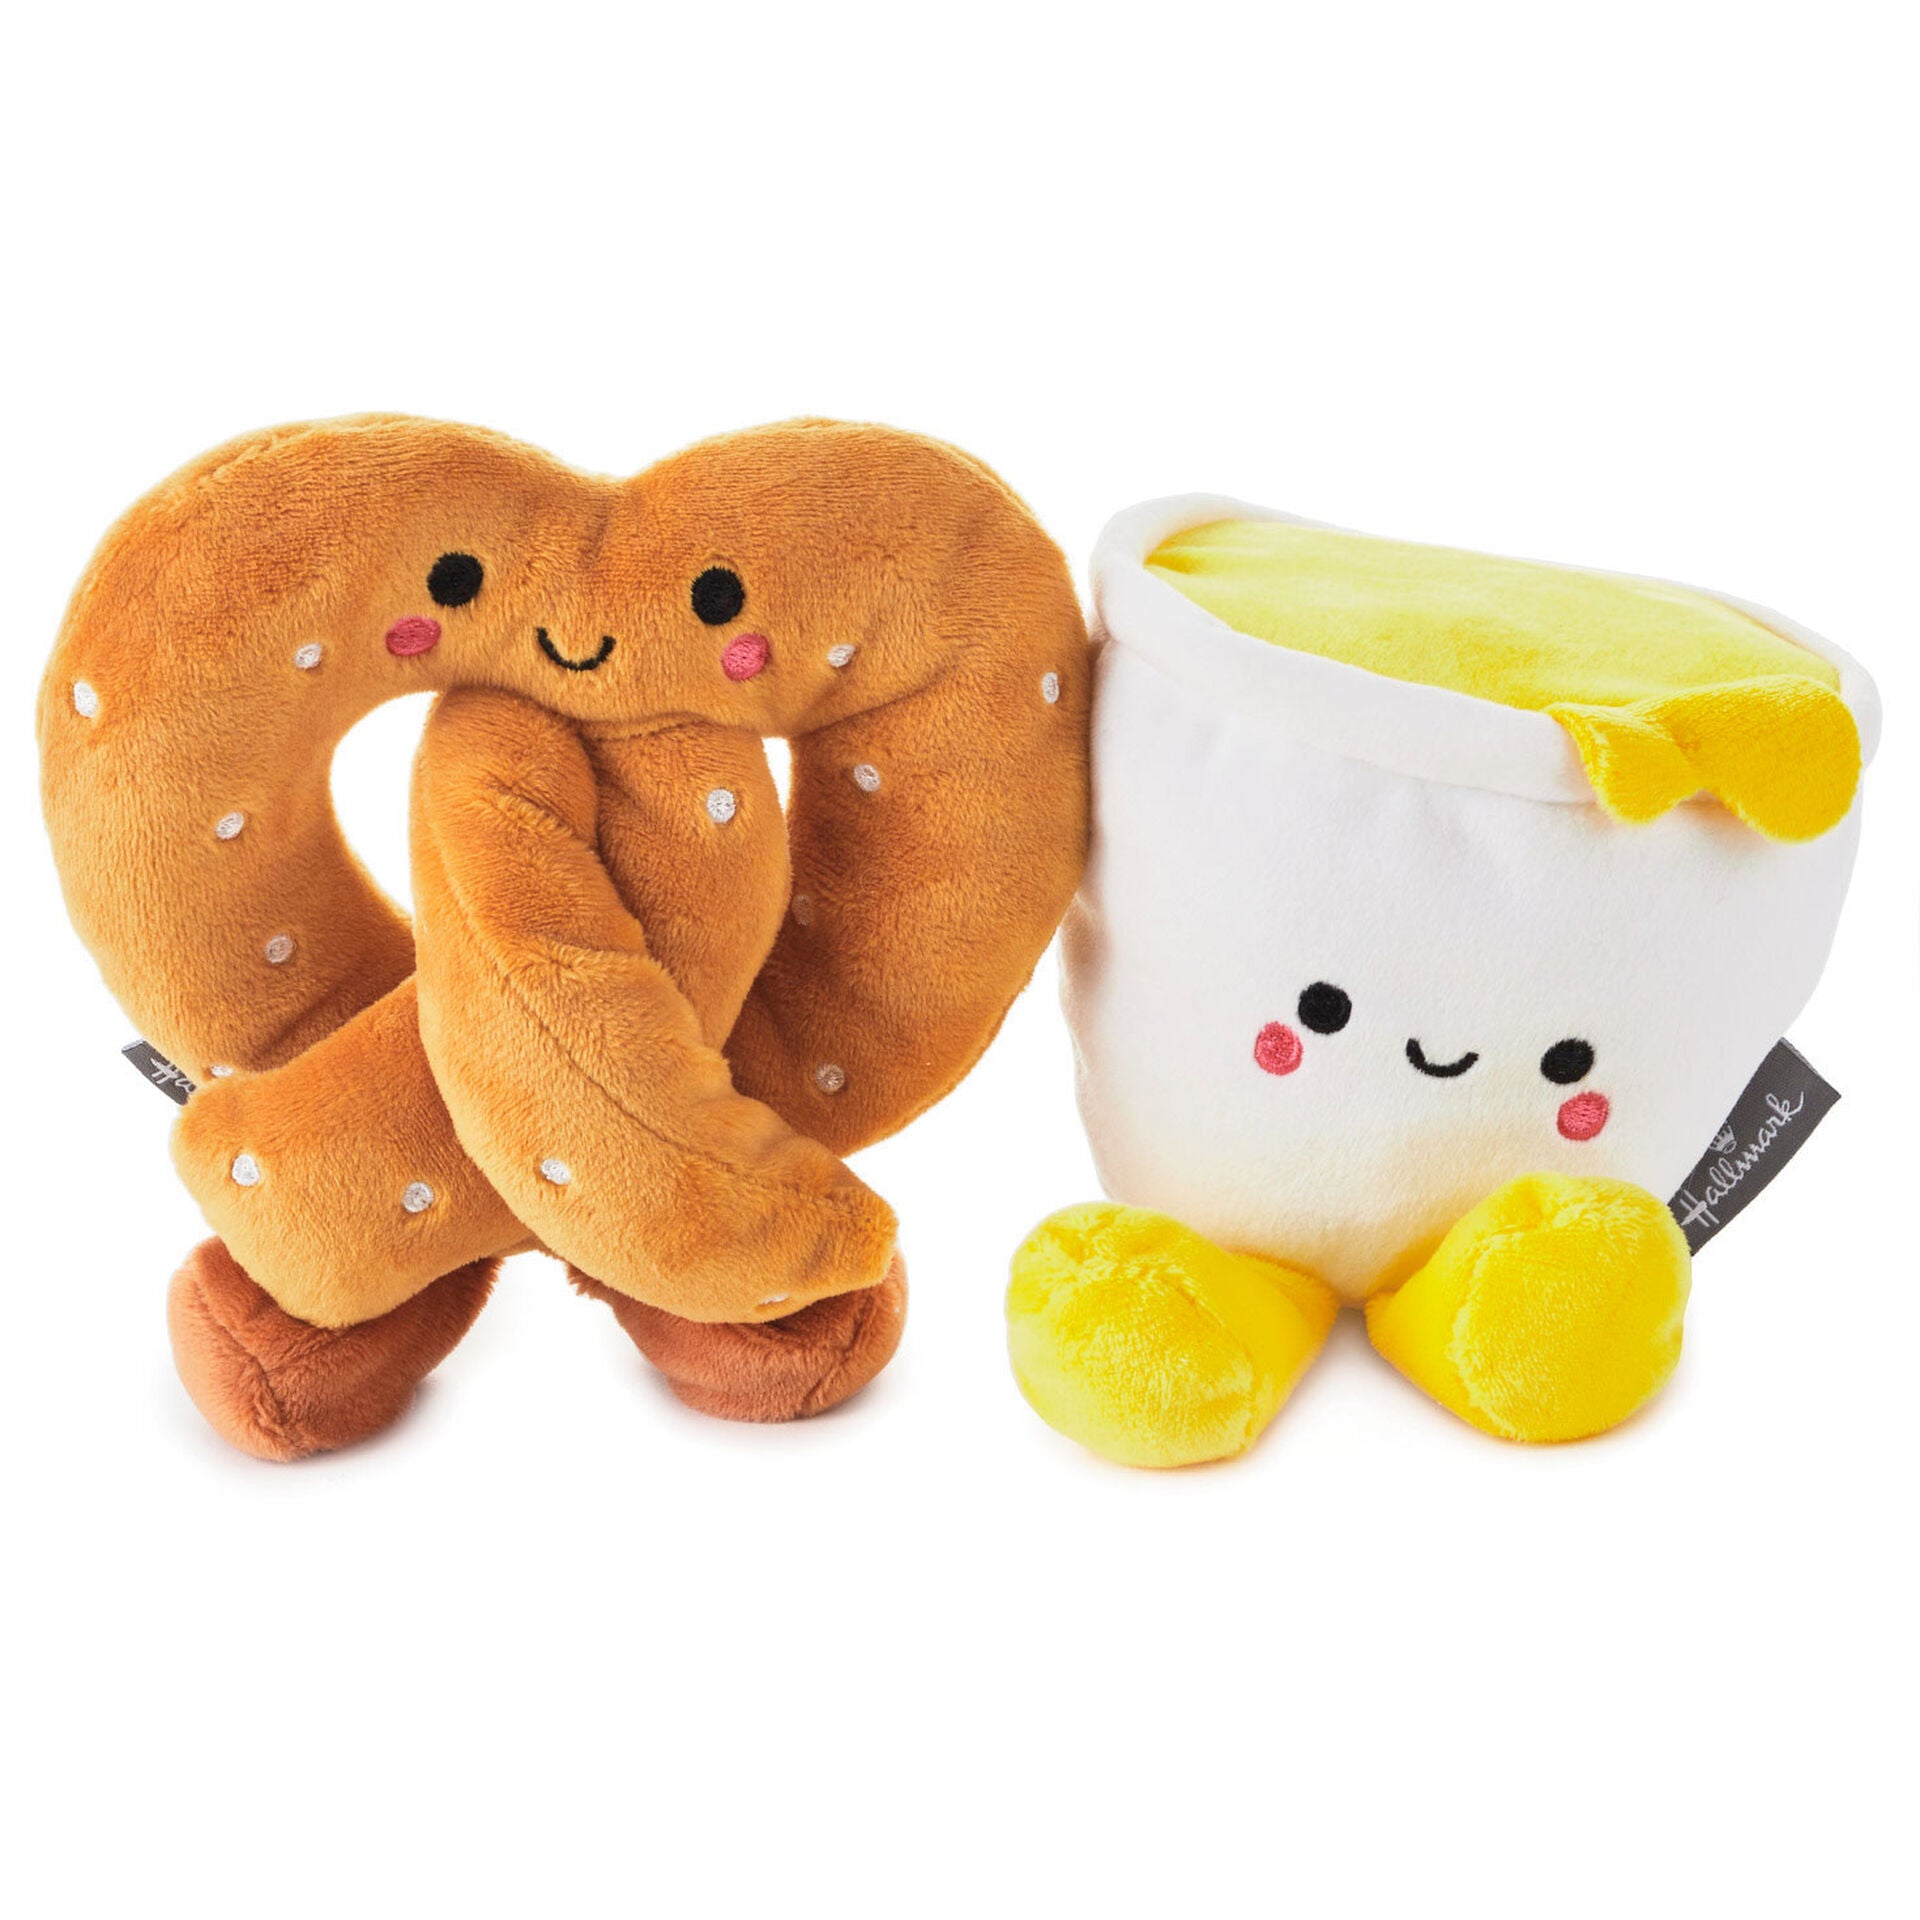 Better Together Pretzel and Cheese Dip Magnetic Plush